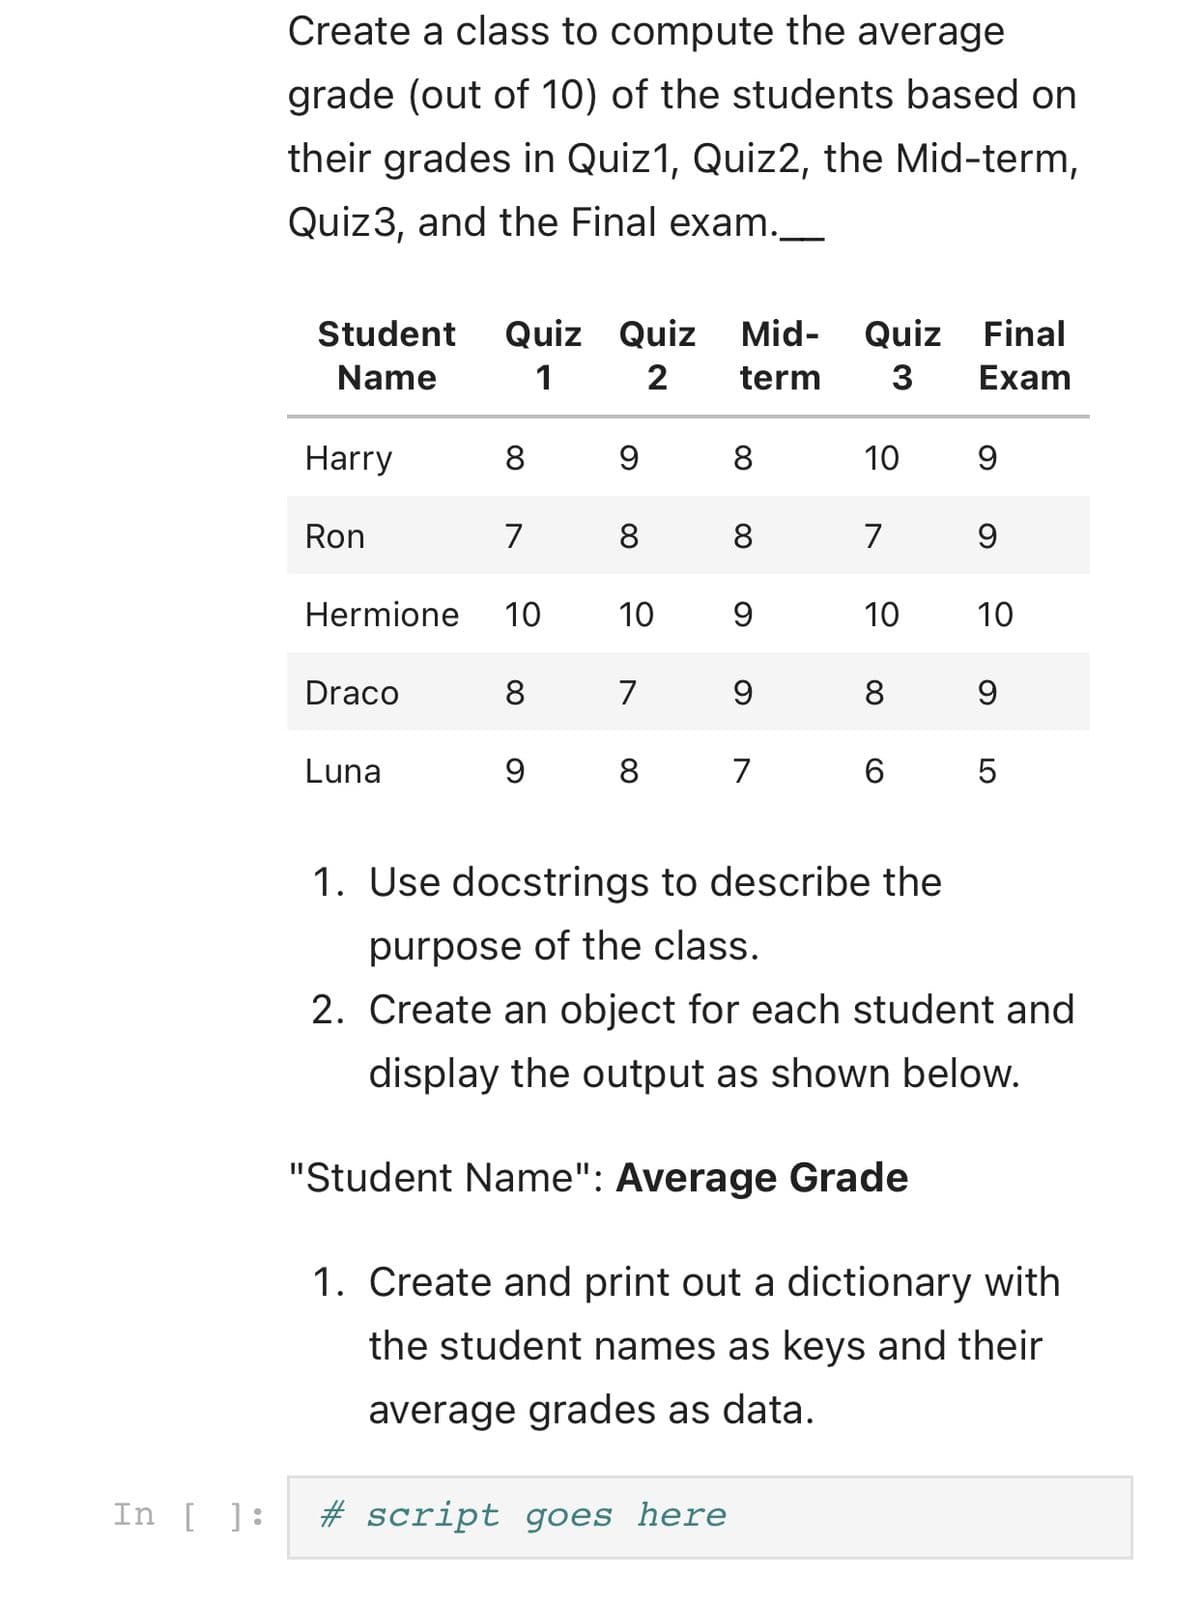 Create a class to compute the average
grade (out of 10) of the students based on
their grades in Quiz1, Quiz2, the Mid-term,
Quiz3, and the Final exam.__
Student
Quiz Quiz
Mid-
Quiz Final
Name
1
term
3
Exam
Harry
8
8.
10
Ron
7
8
8
7
Hermione
10
10
10
10
Draco
8
7
9.
8
Luna
9
8
7
1. Use docstrings to describe the
purpose of the class.
2. Create an object for each student and
display the output as shown below.
"Student Name": Average Grade
1. Create and print out a dictionary with
the student names as keys and their
average grades as data.
In [ ]:
# script goes here
LO
00
